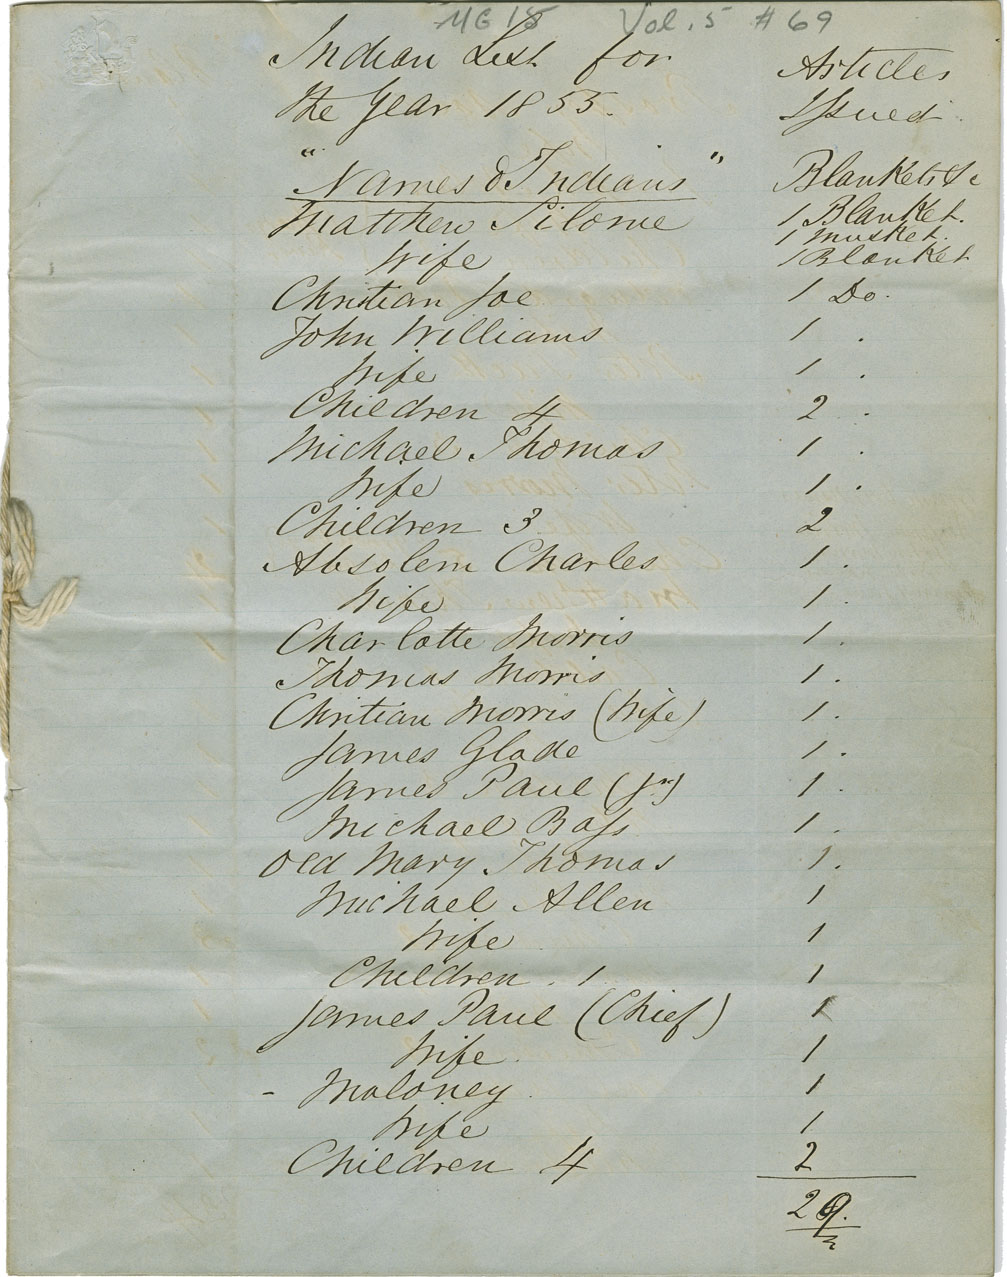 Partial list of Mi'kmaq for the year 1853 with names of Mi'kmaq and articles issued.